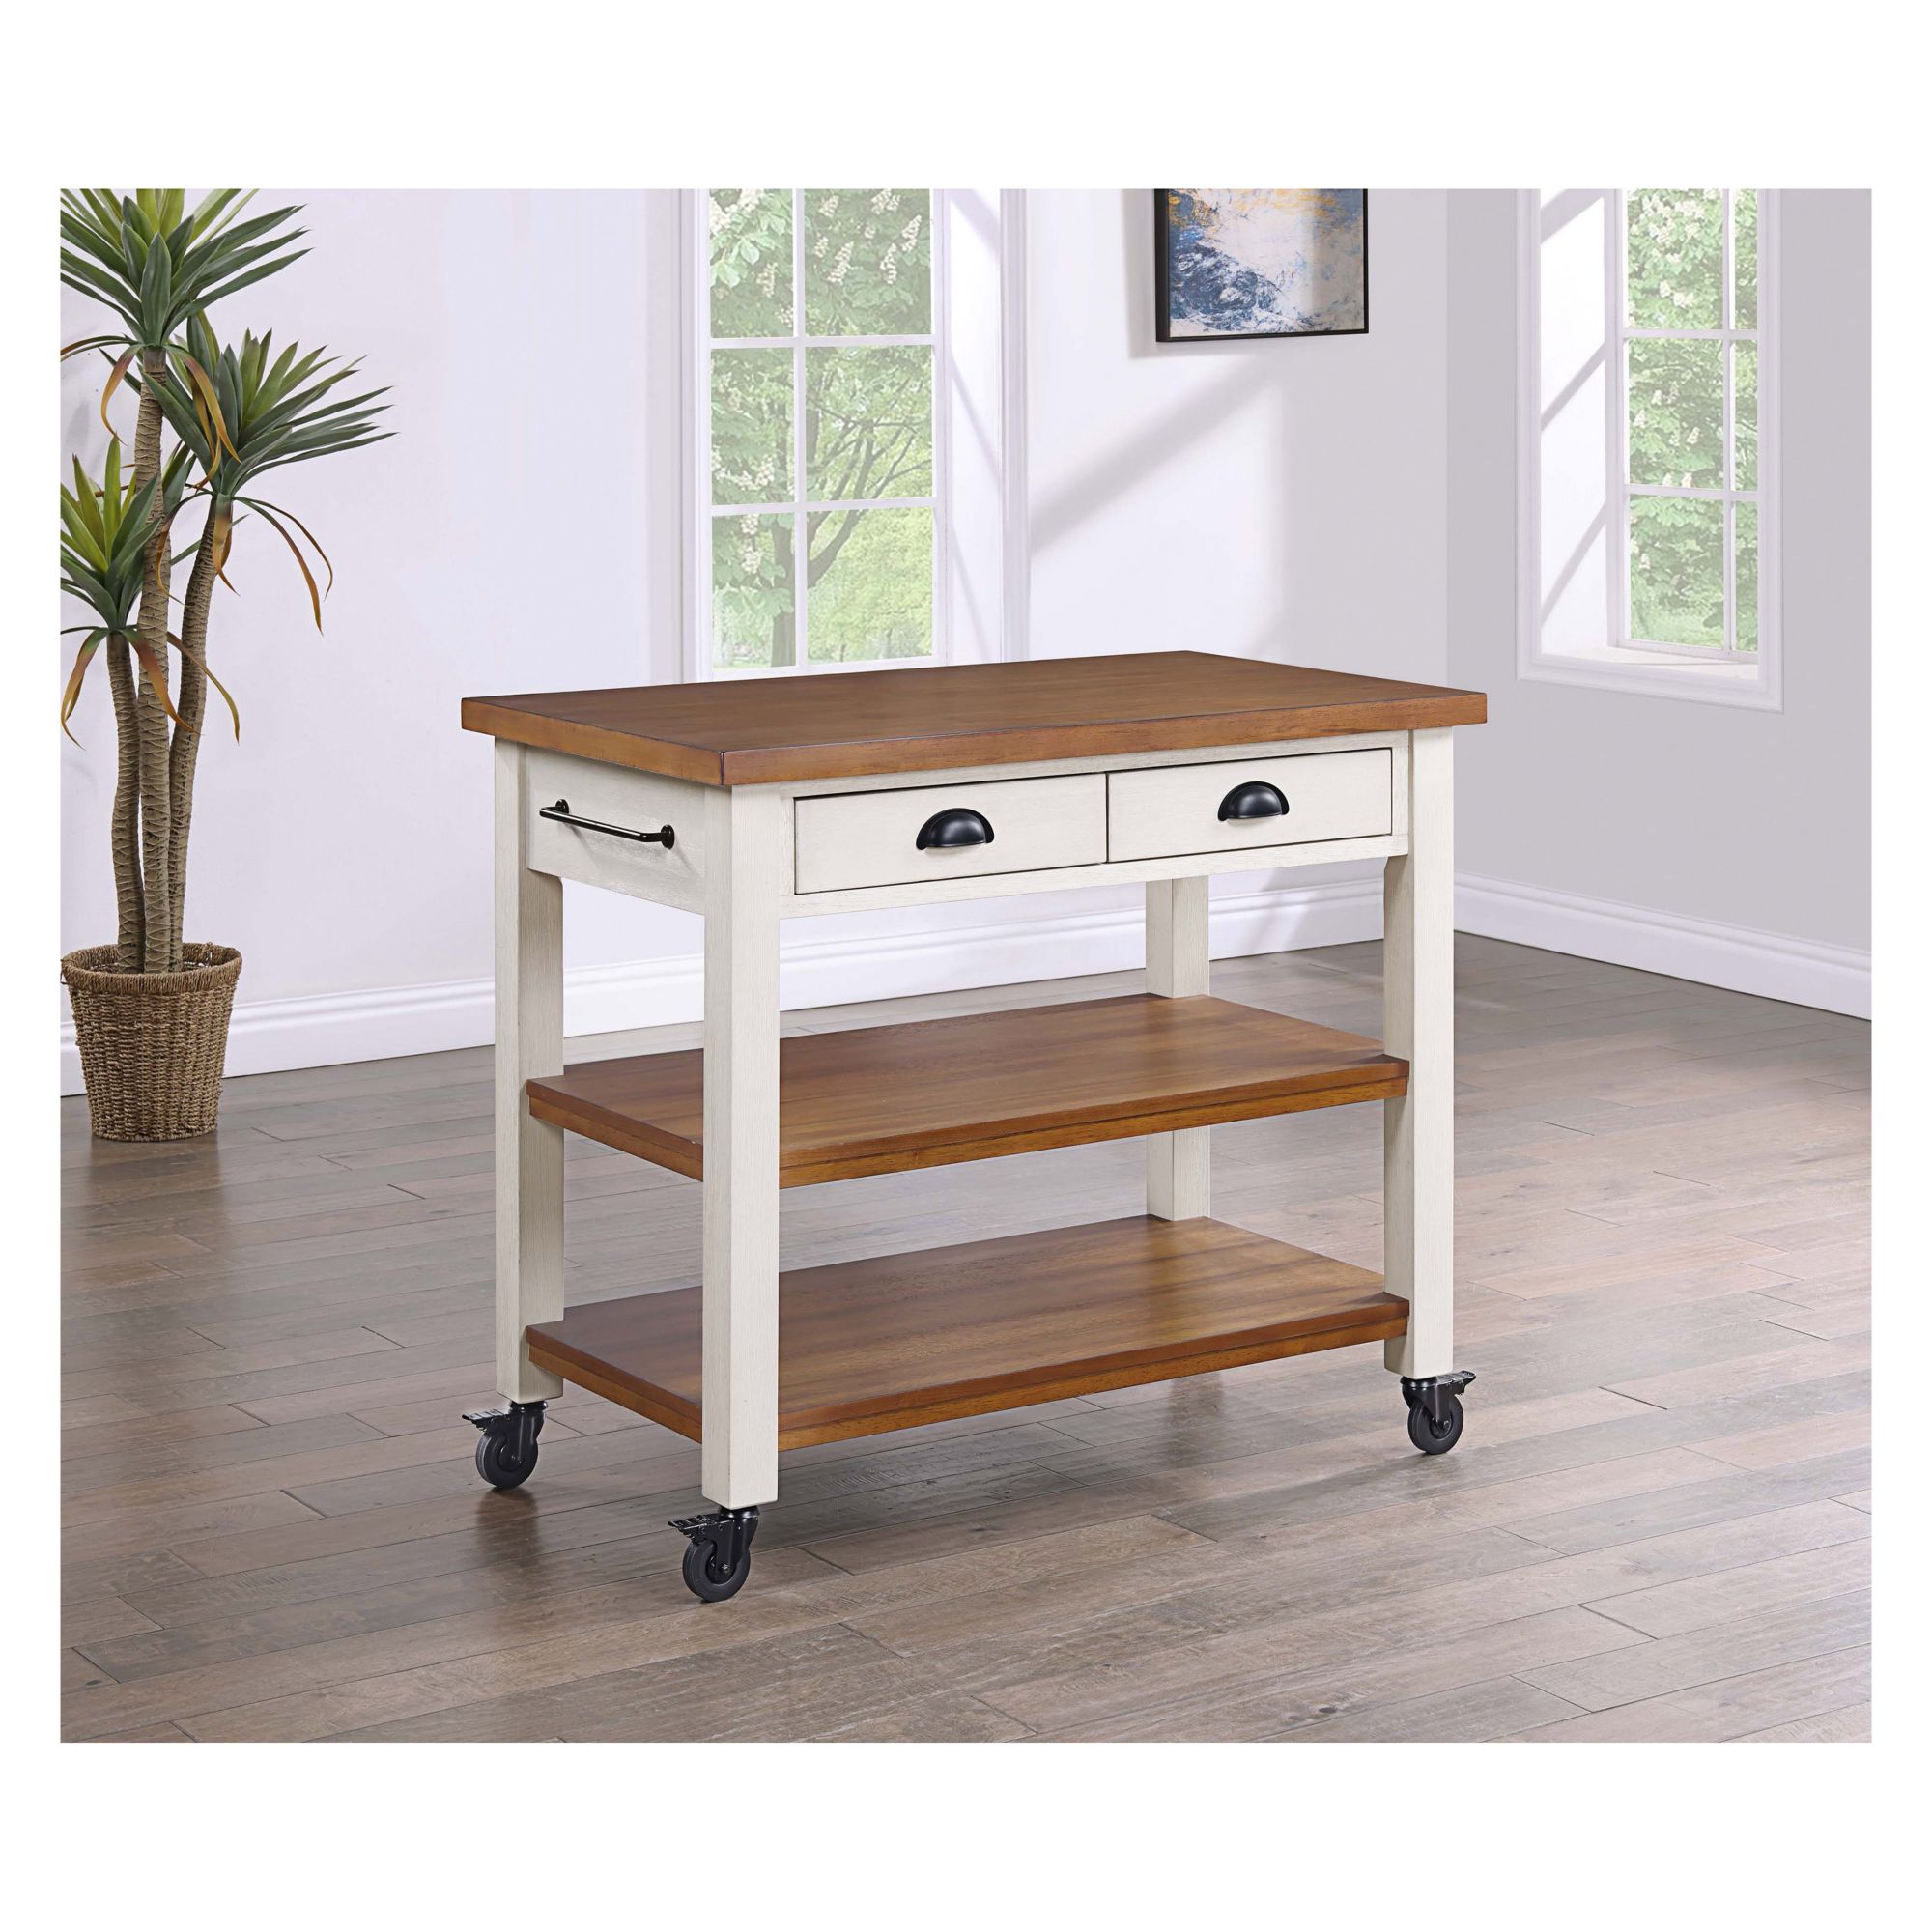 Home to Office Newport Kitchen Cart - White